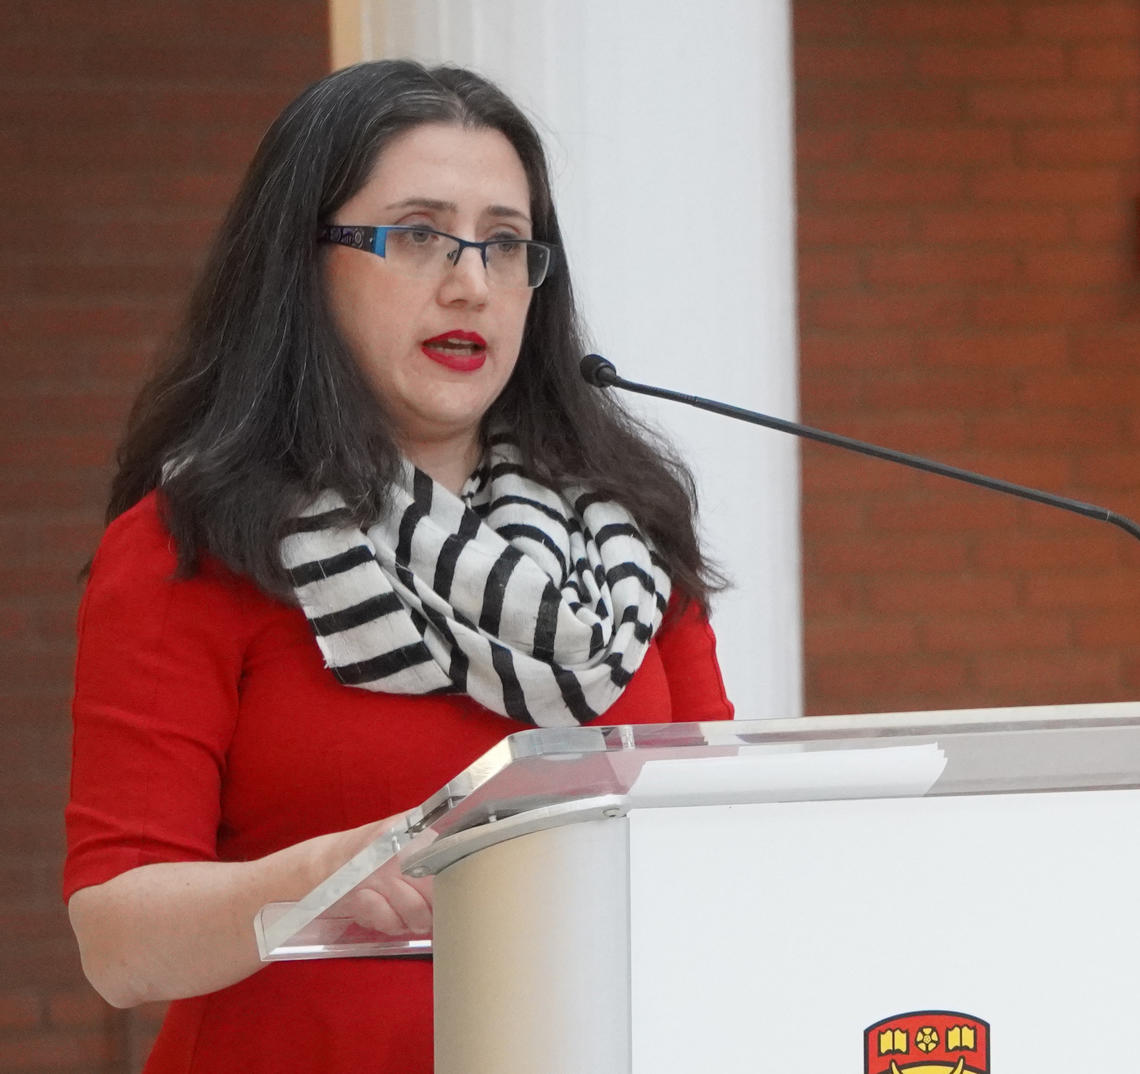 Schulich professor thinks of her home country in calling for end to gender-based violence